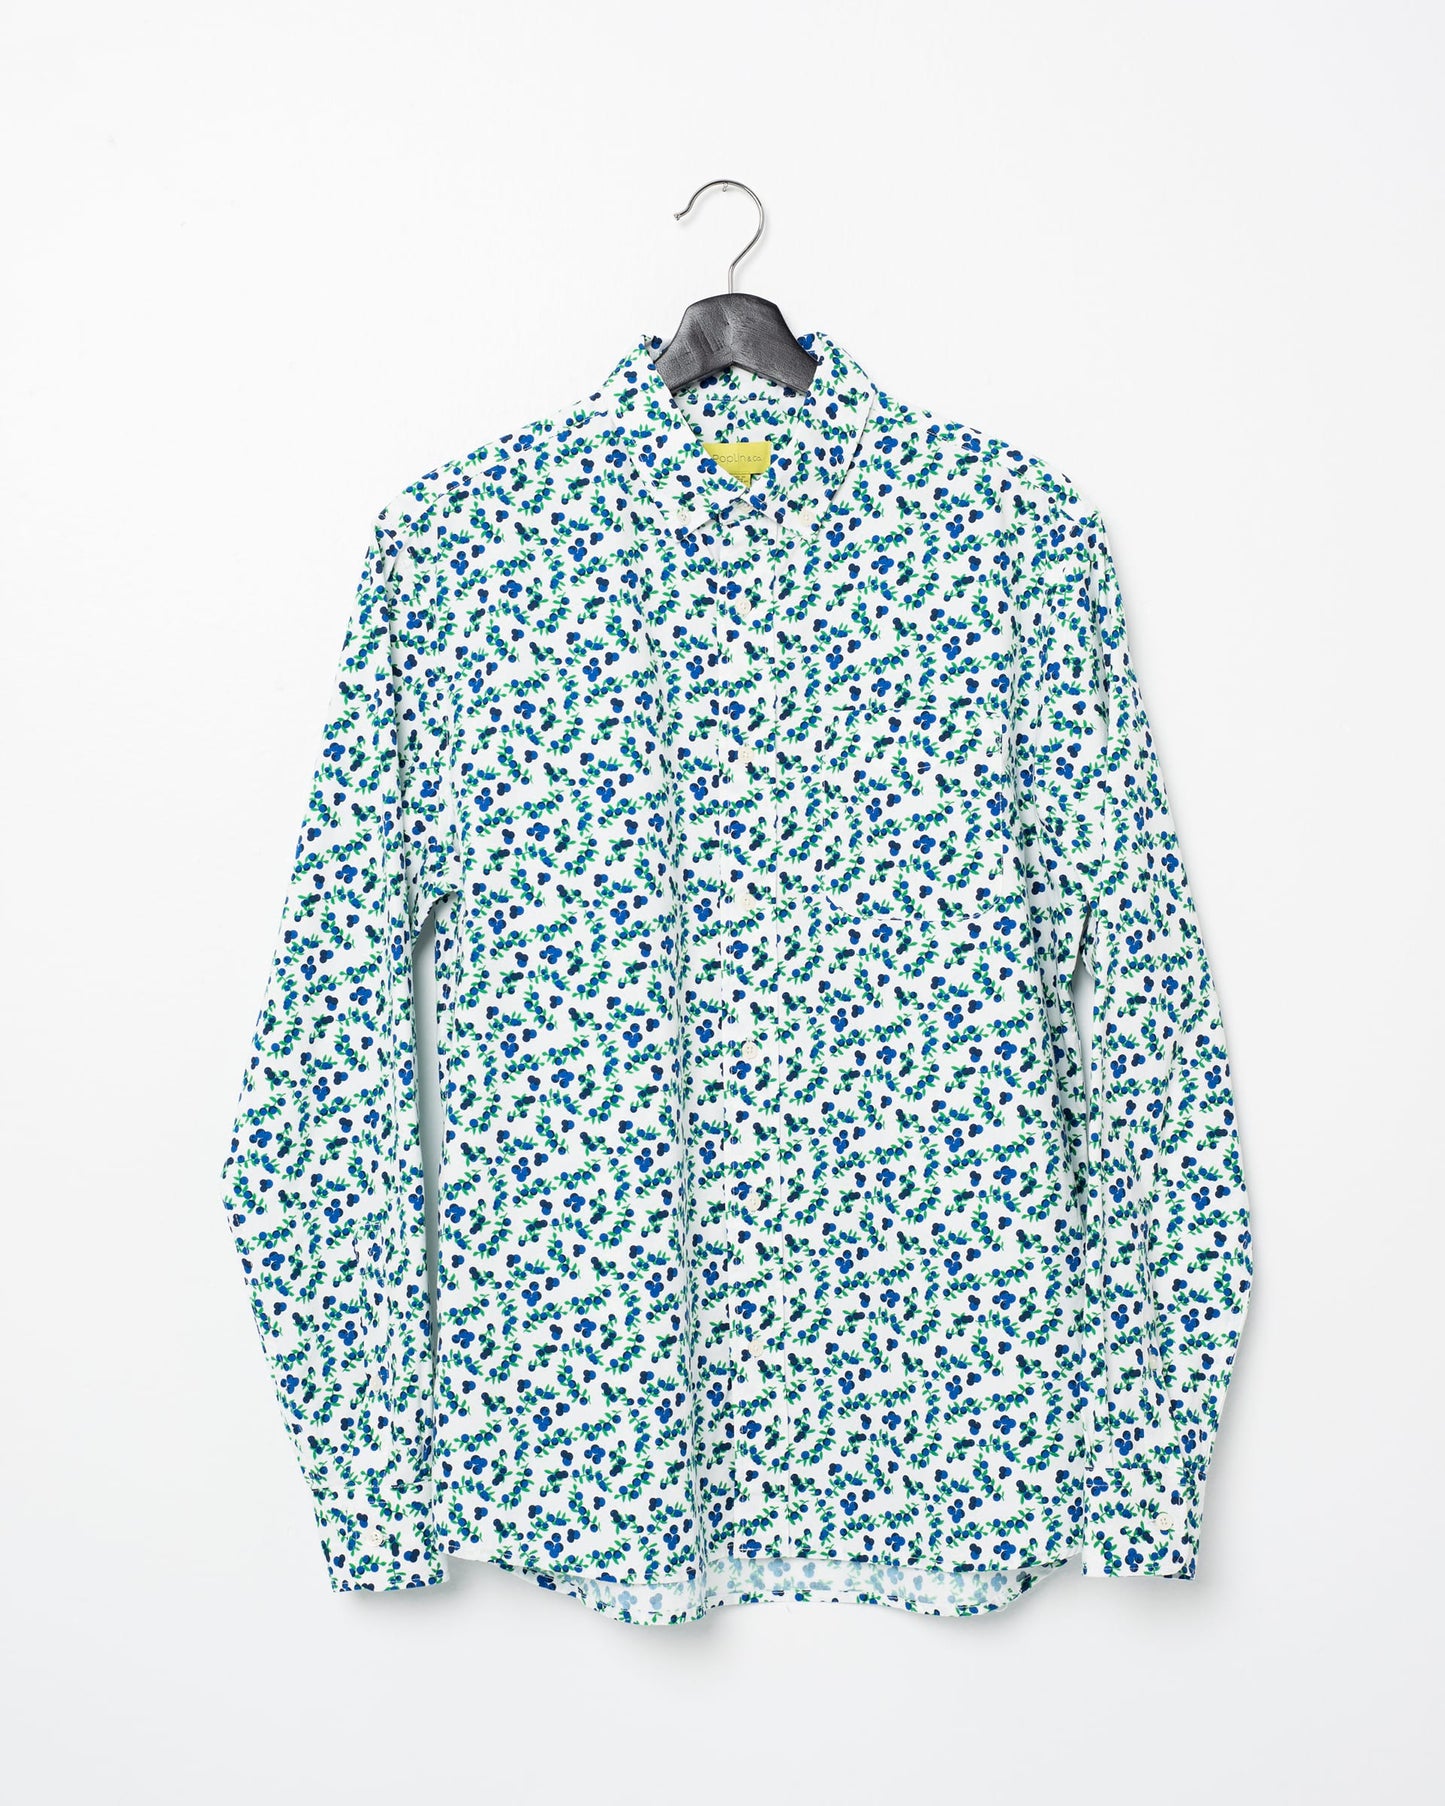 Blueberry Printed Casual Button-Down Long Sleeve Shirt